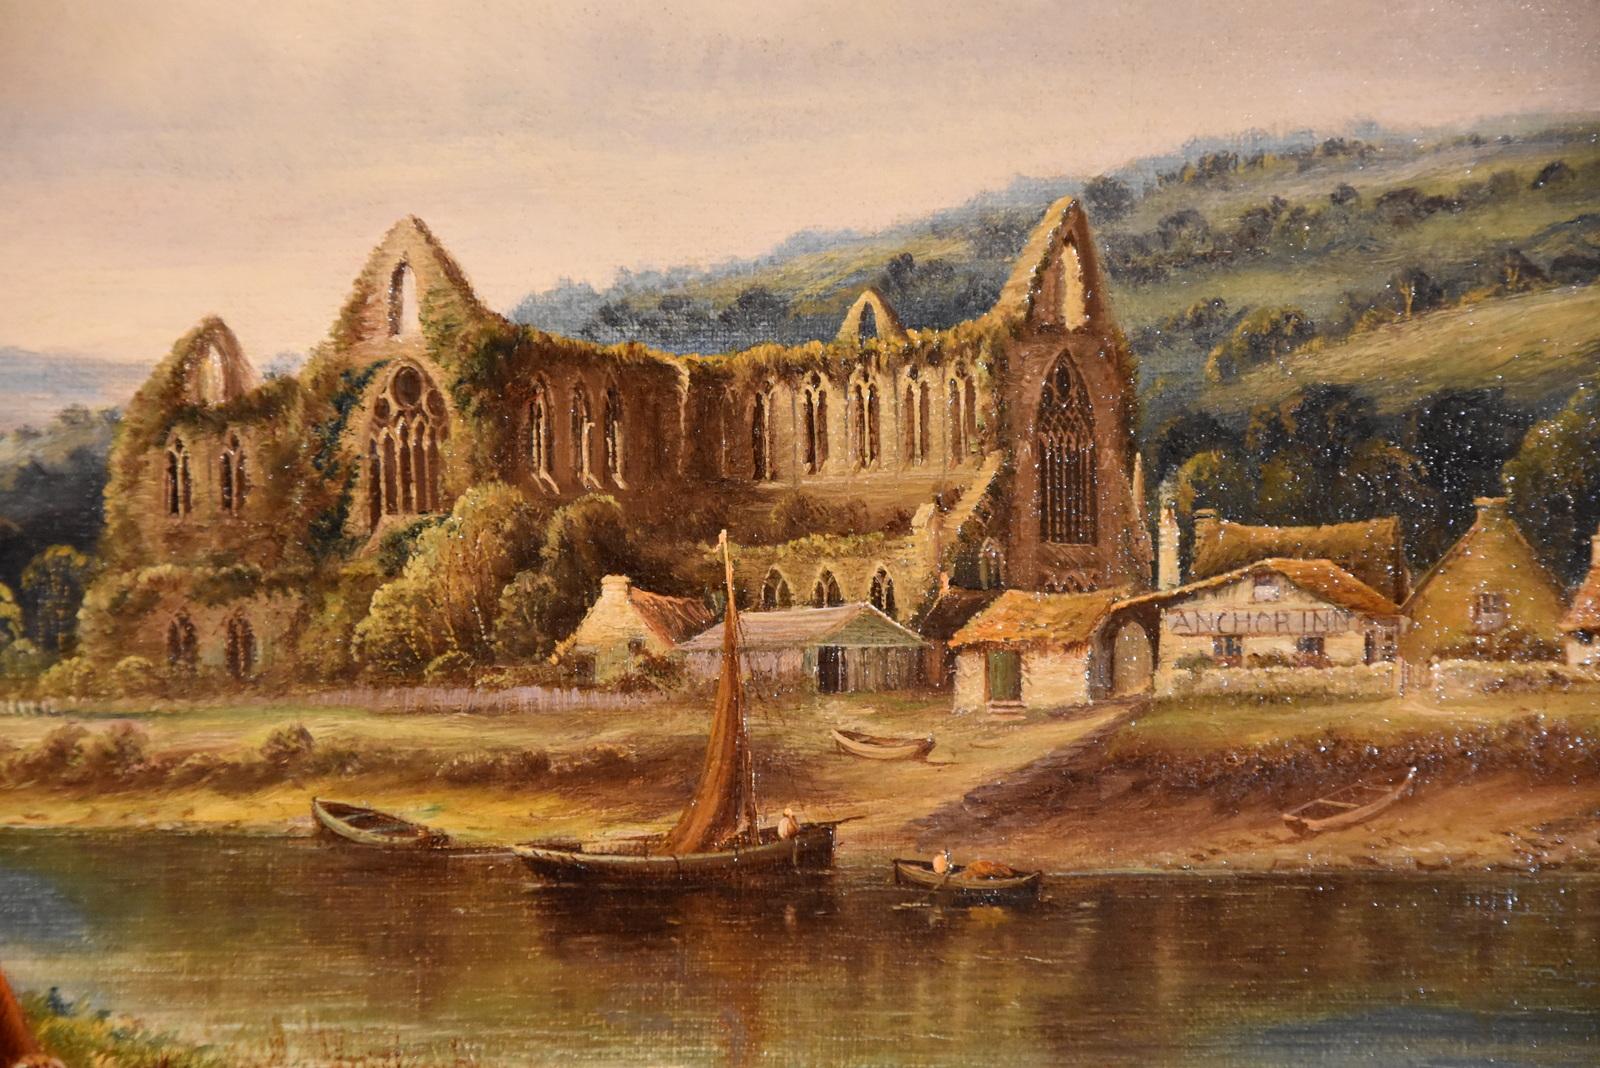 Oil painting by Henry Harris “Tintern Abbey”, 1852-1926. Painter of South-West landscapes. The son of a Cullompton miller, one of 15 boys. Had a studio in Bristol with hIs brother George. Oil on canvas. Signed. 

Dimensions unframed 11 x